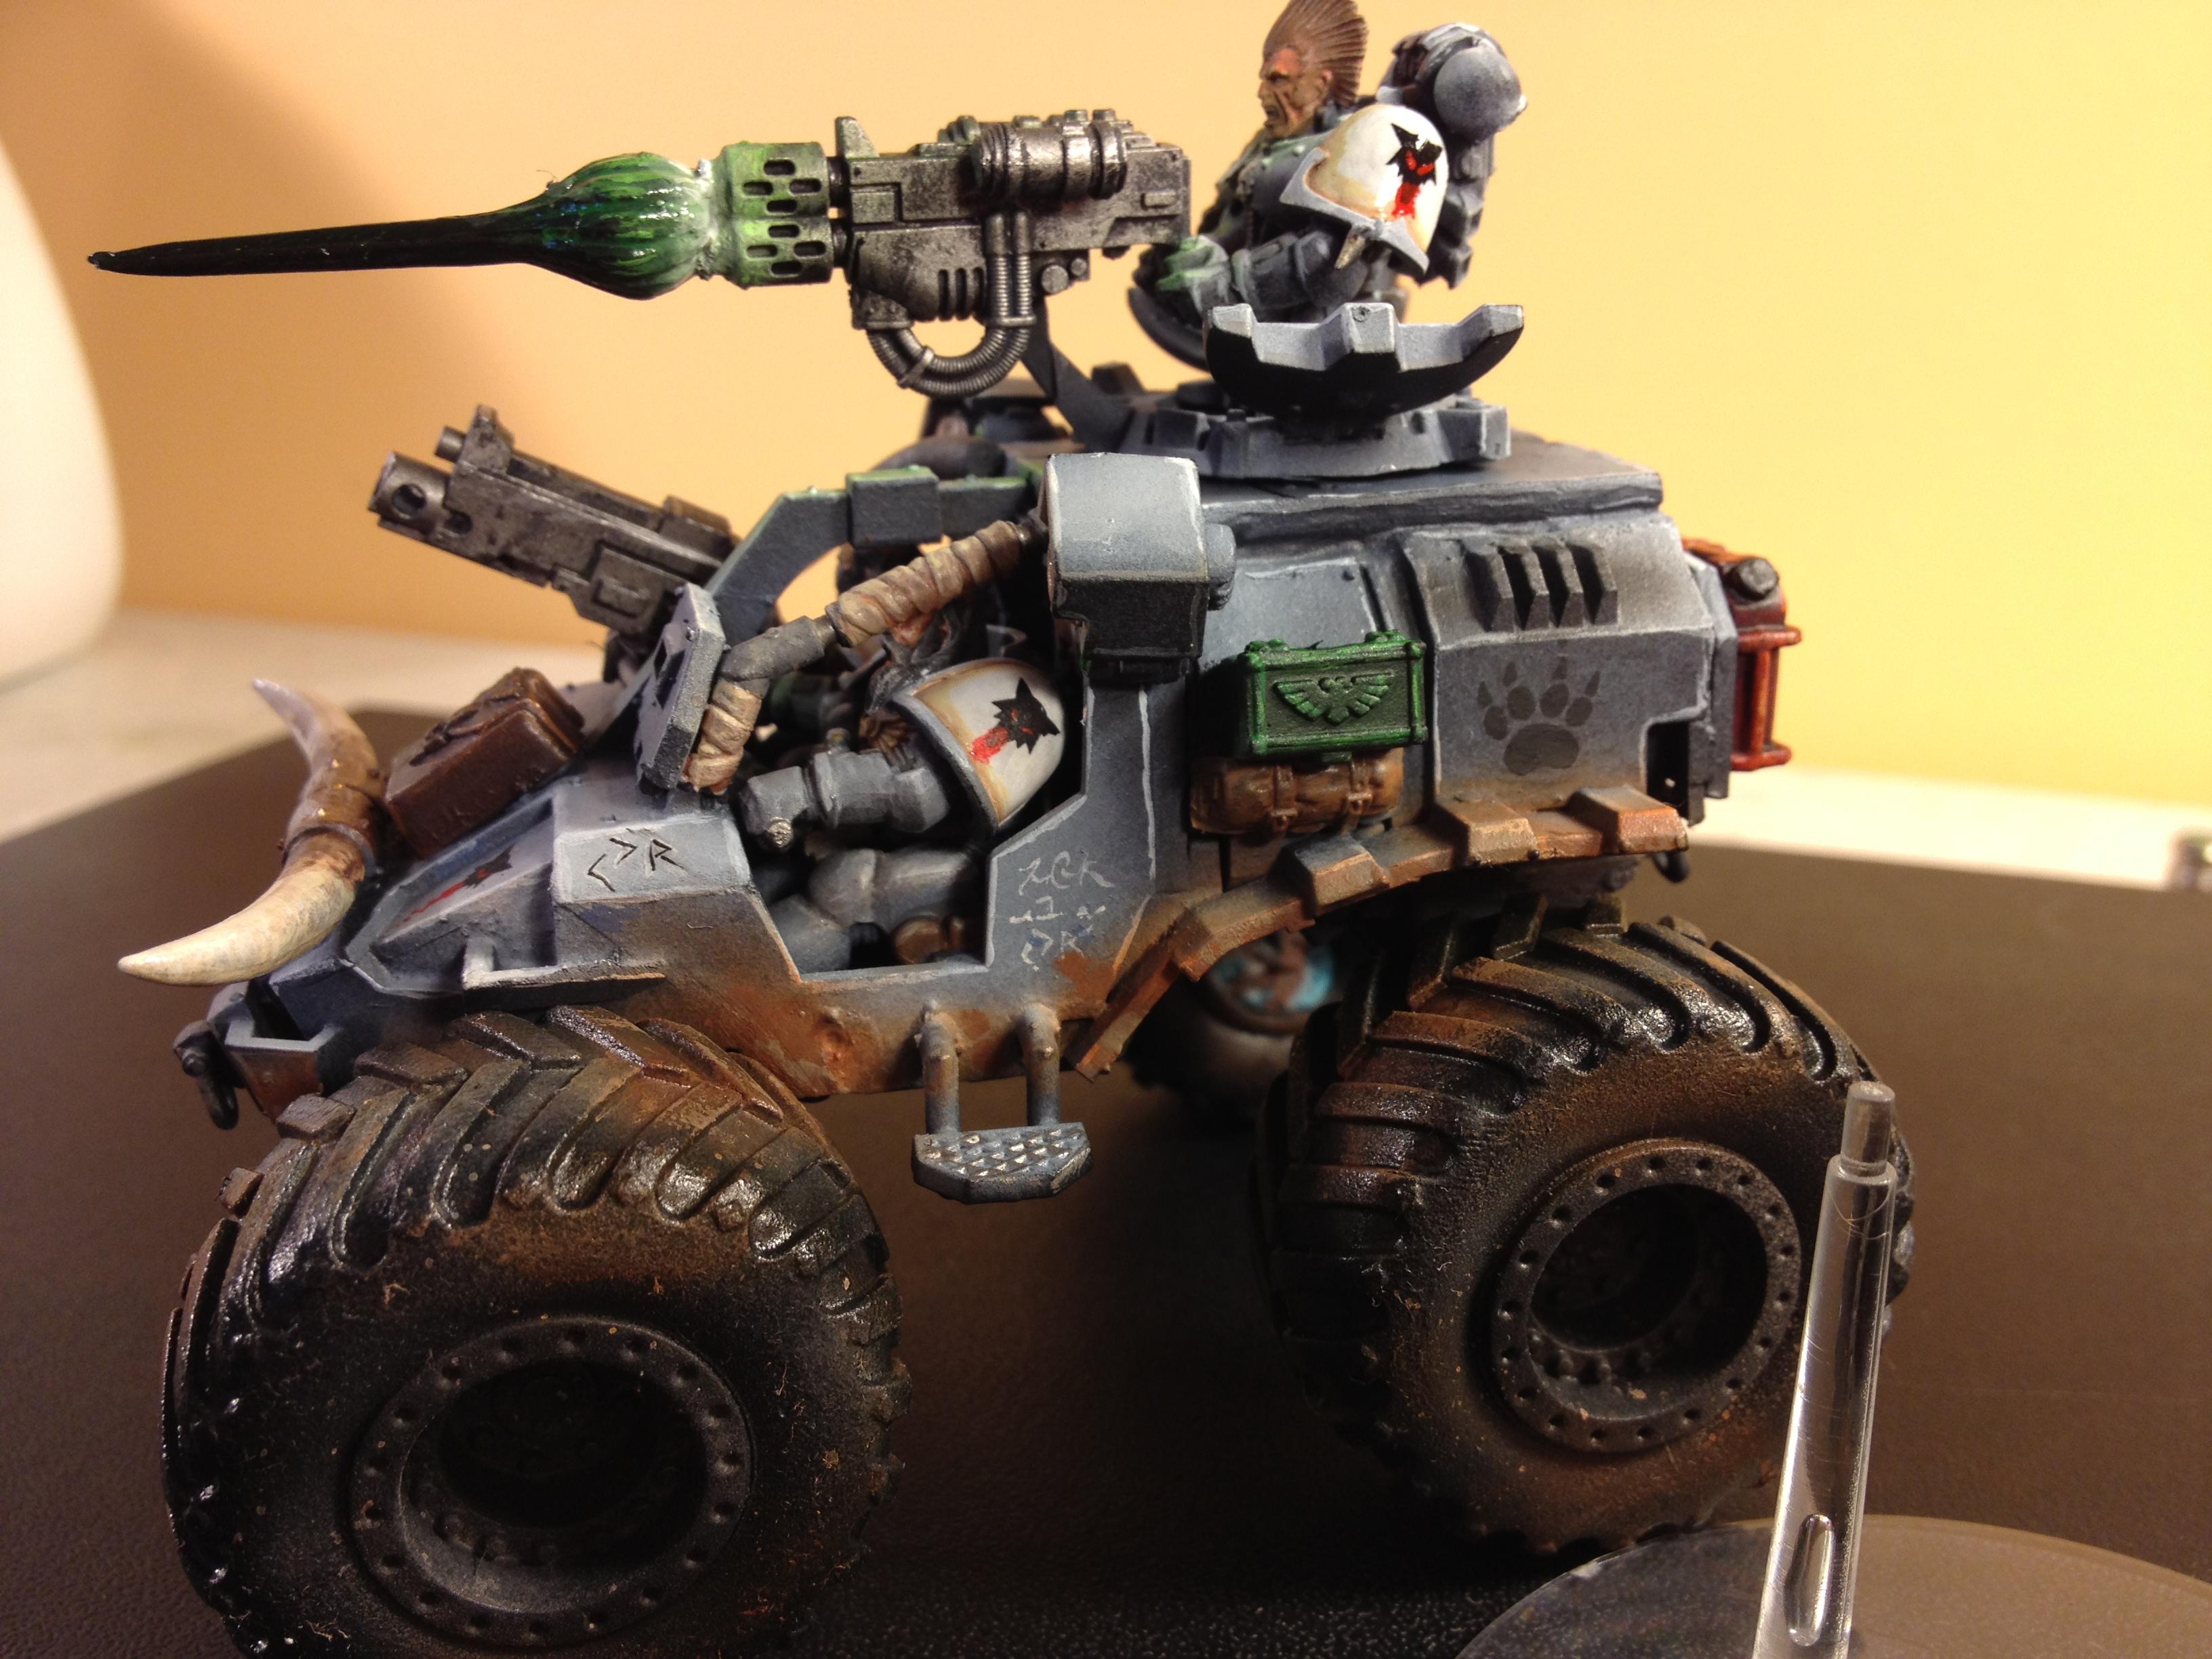 honderd bronzen Standaard Conversion, Dune Buggy, Land Speeder - Land Speeder Dune Buggy - Gallery -  DakkaDakka | Roll the dice to see if I'm getting drunk.